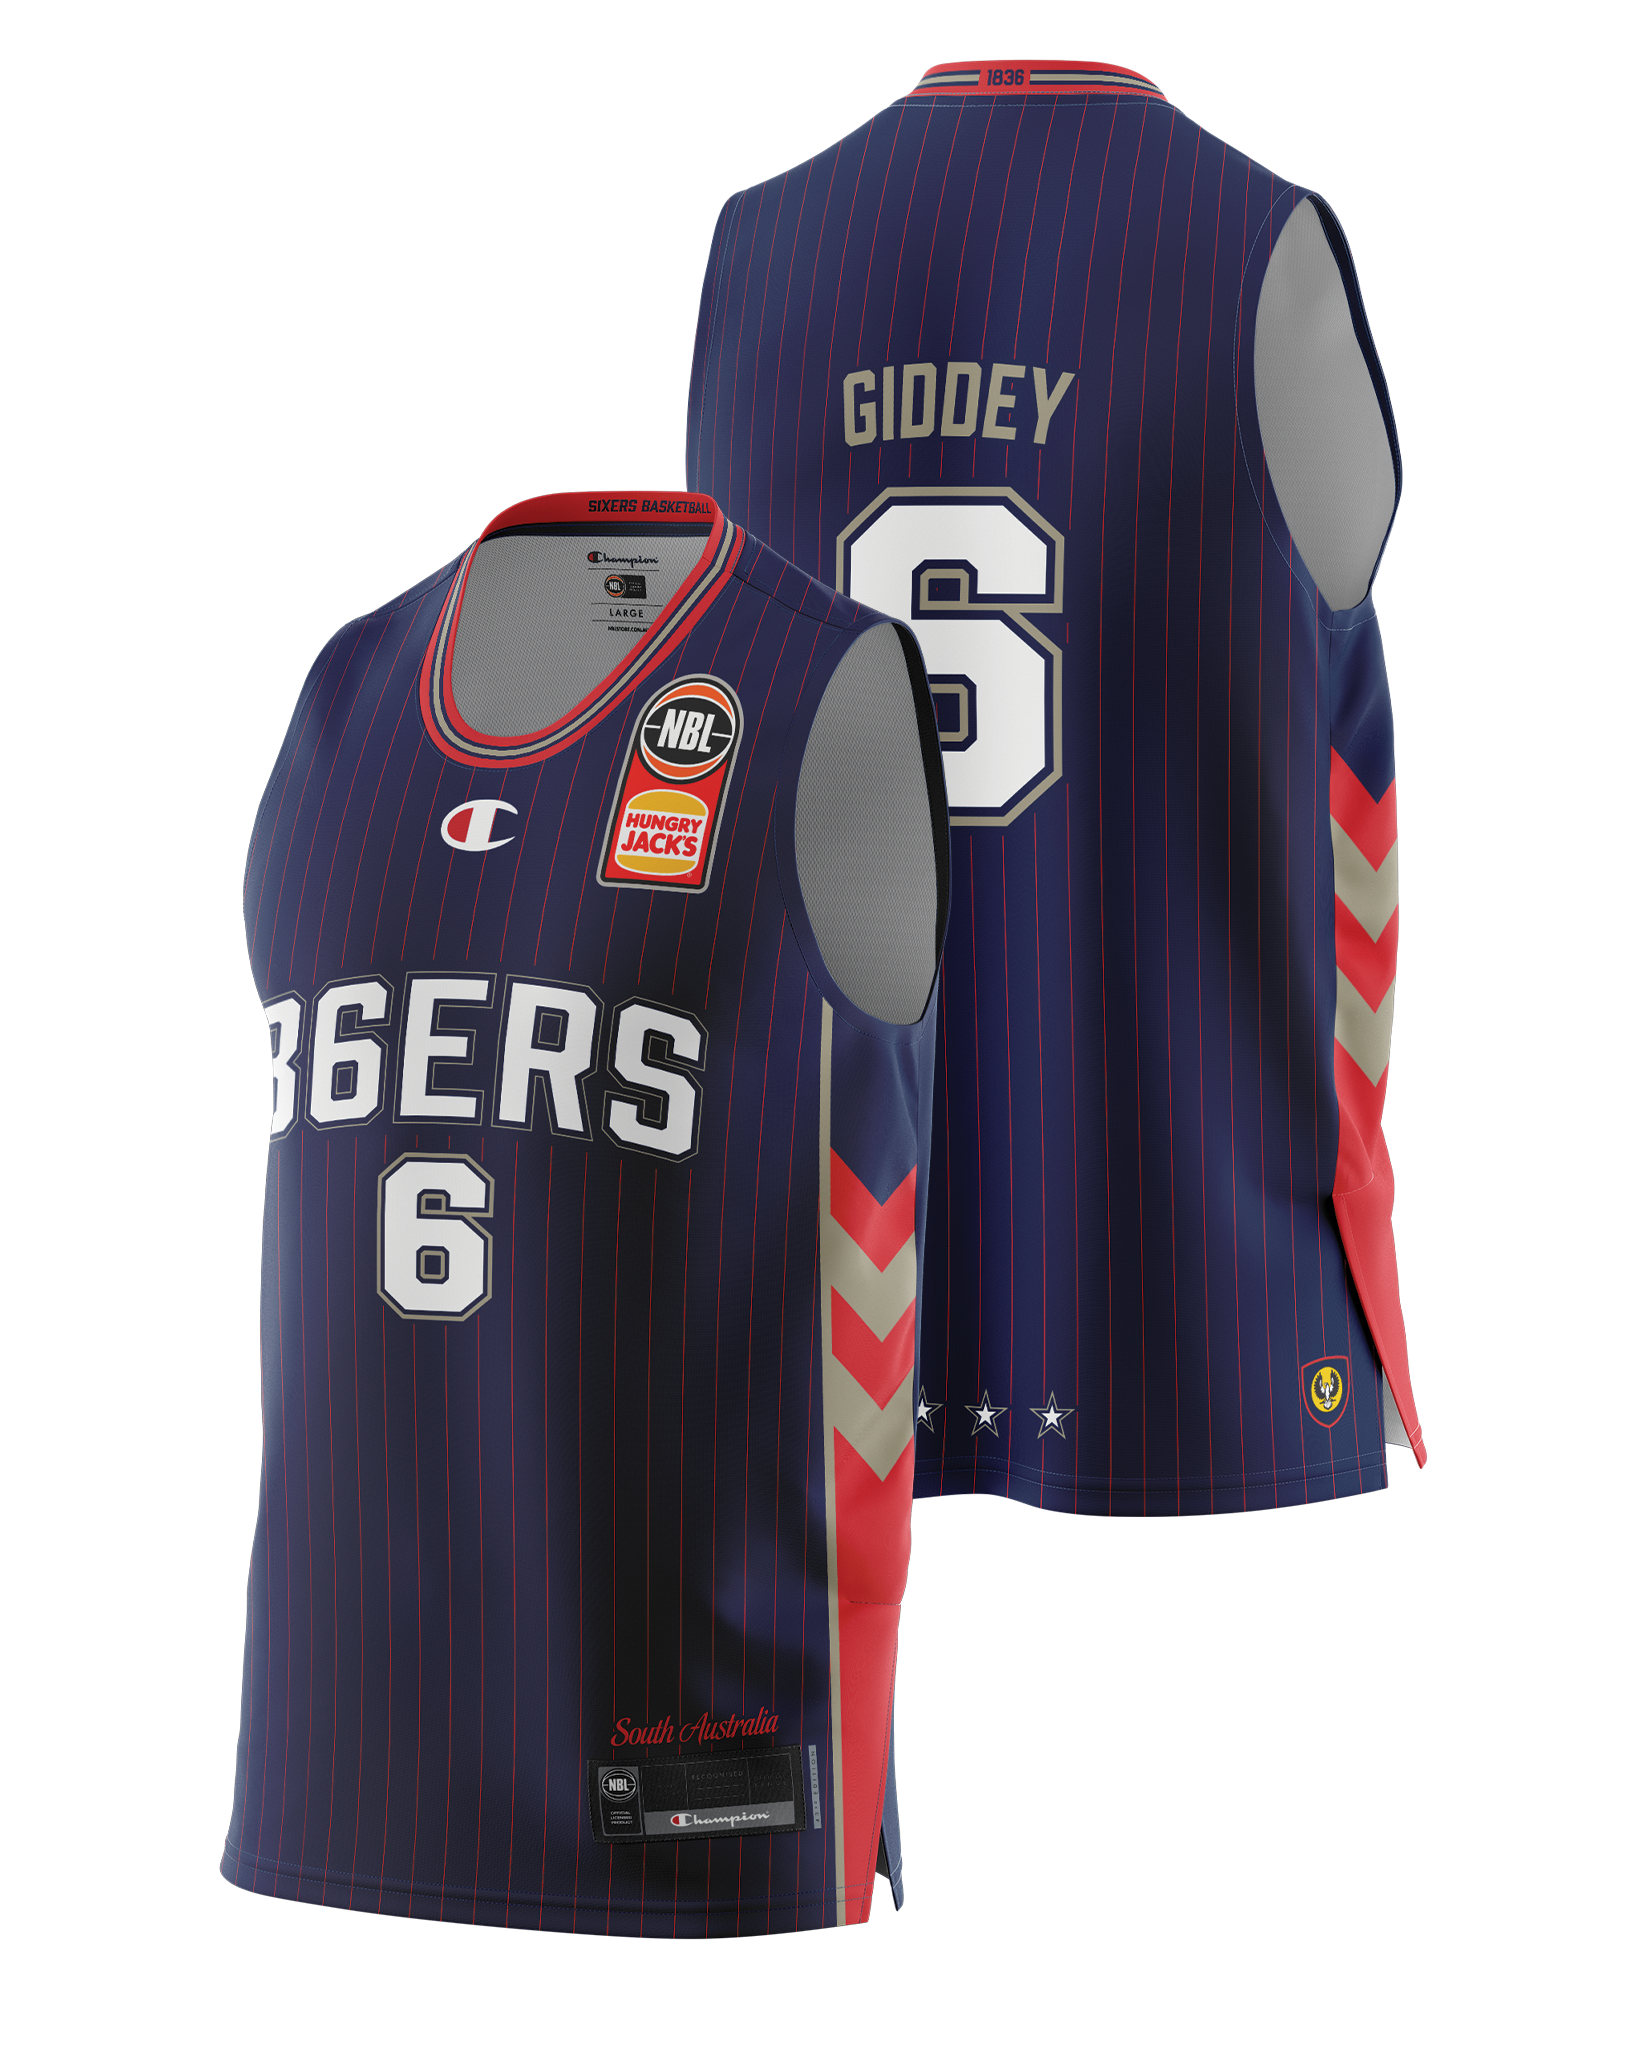 Adelaide 36ers 2021 Authentic Home Jersey - Josh Giddey - Adelaide 36ers